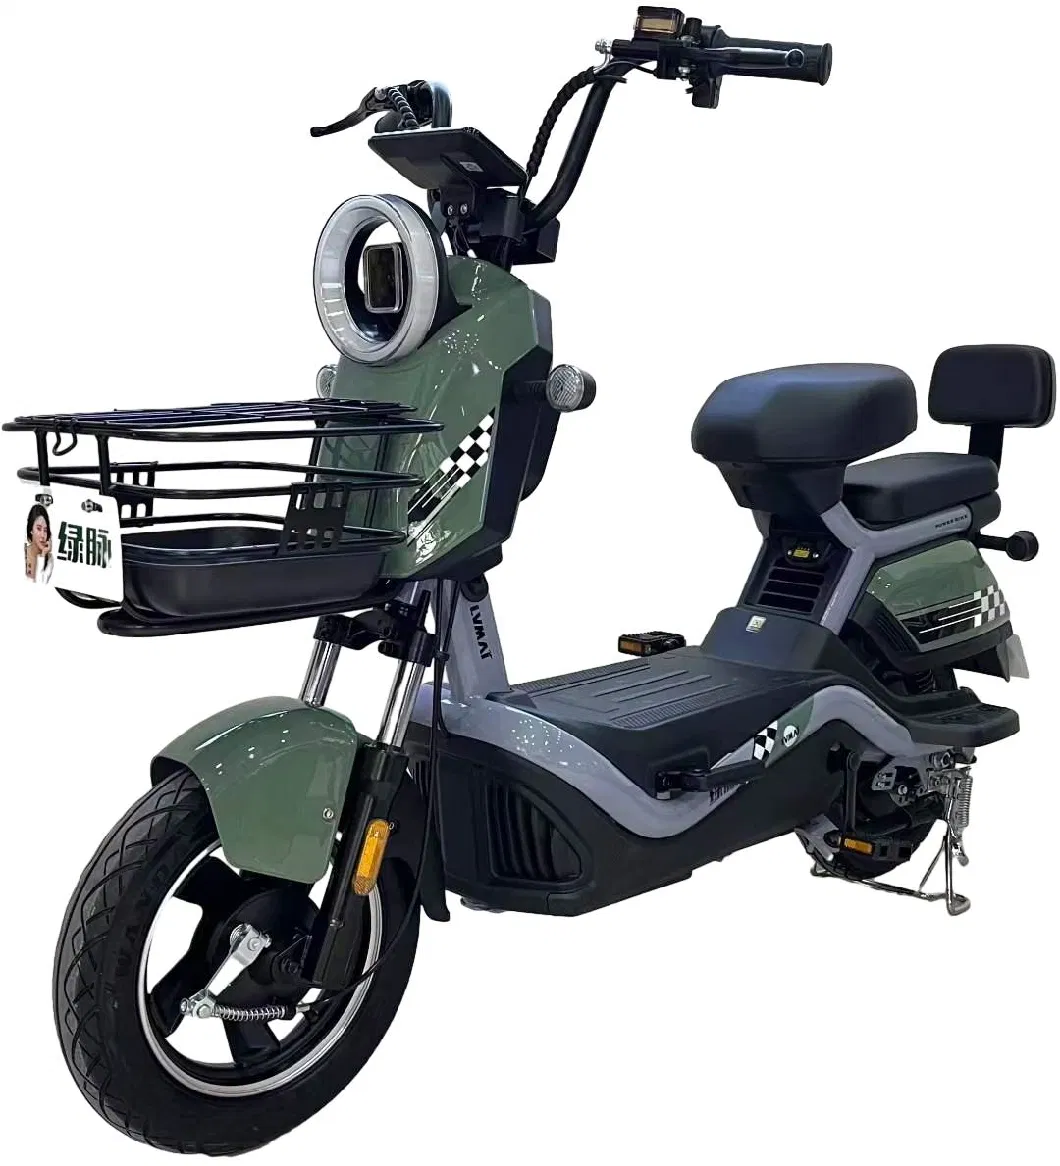 Affordable Electric Scooter for Adults - 2 Wheel Moped Bike